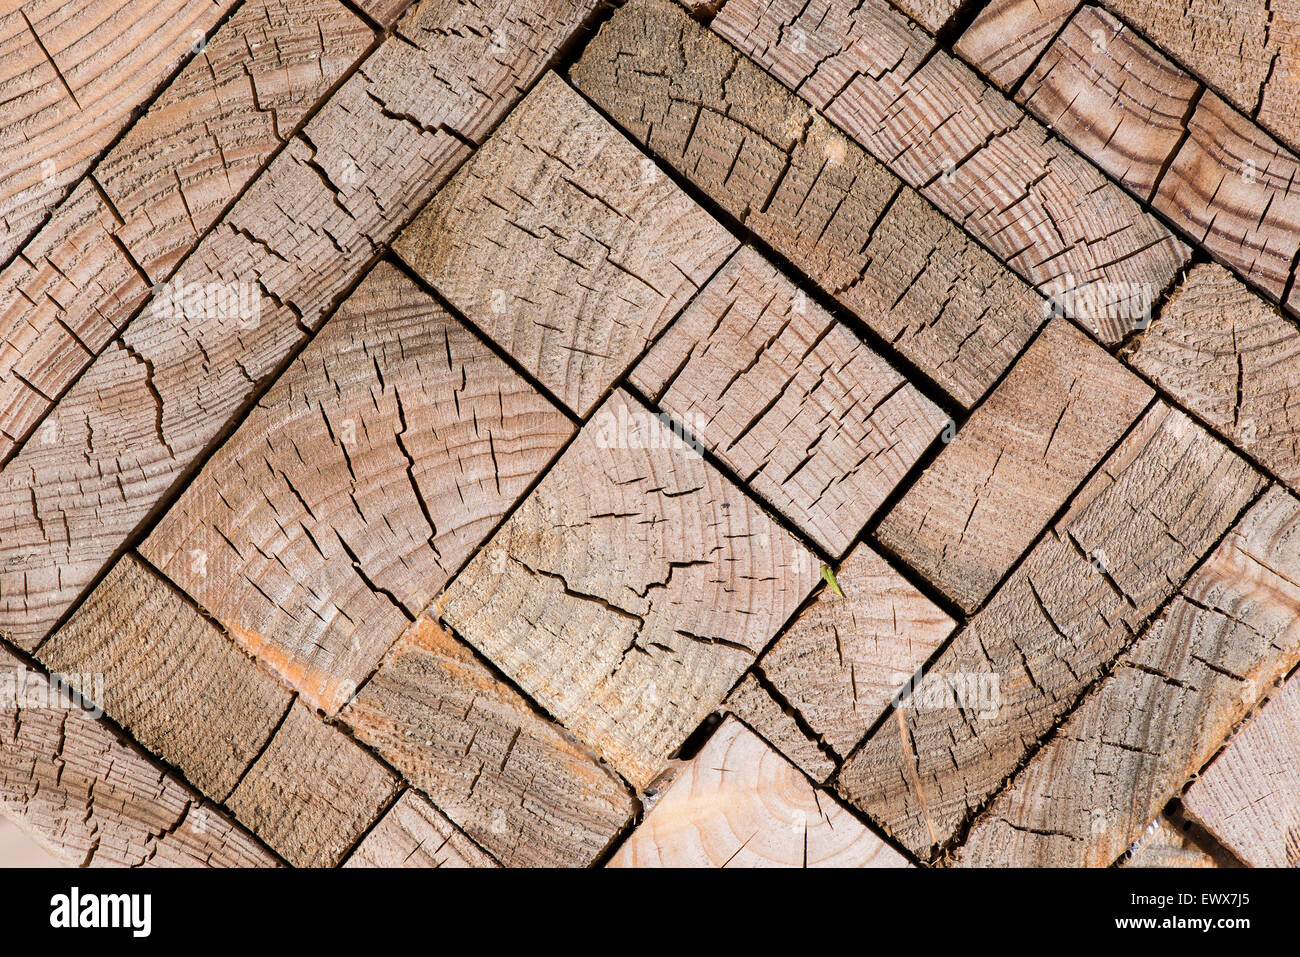 Blocks of oak (Quercus sp.) with annual rings, Baden-Württemberg, Germany Stock Photo